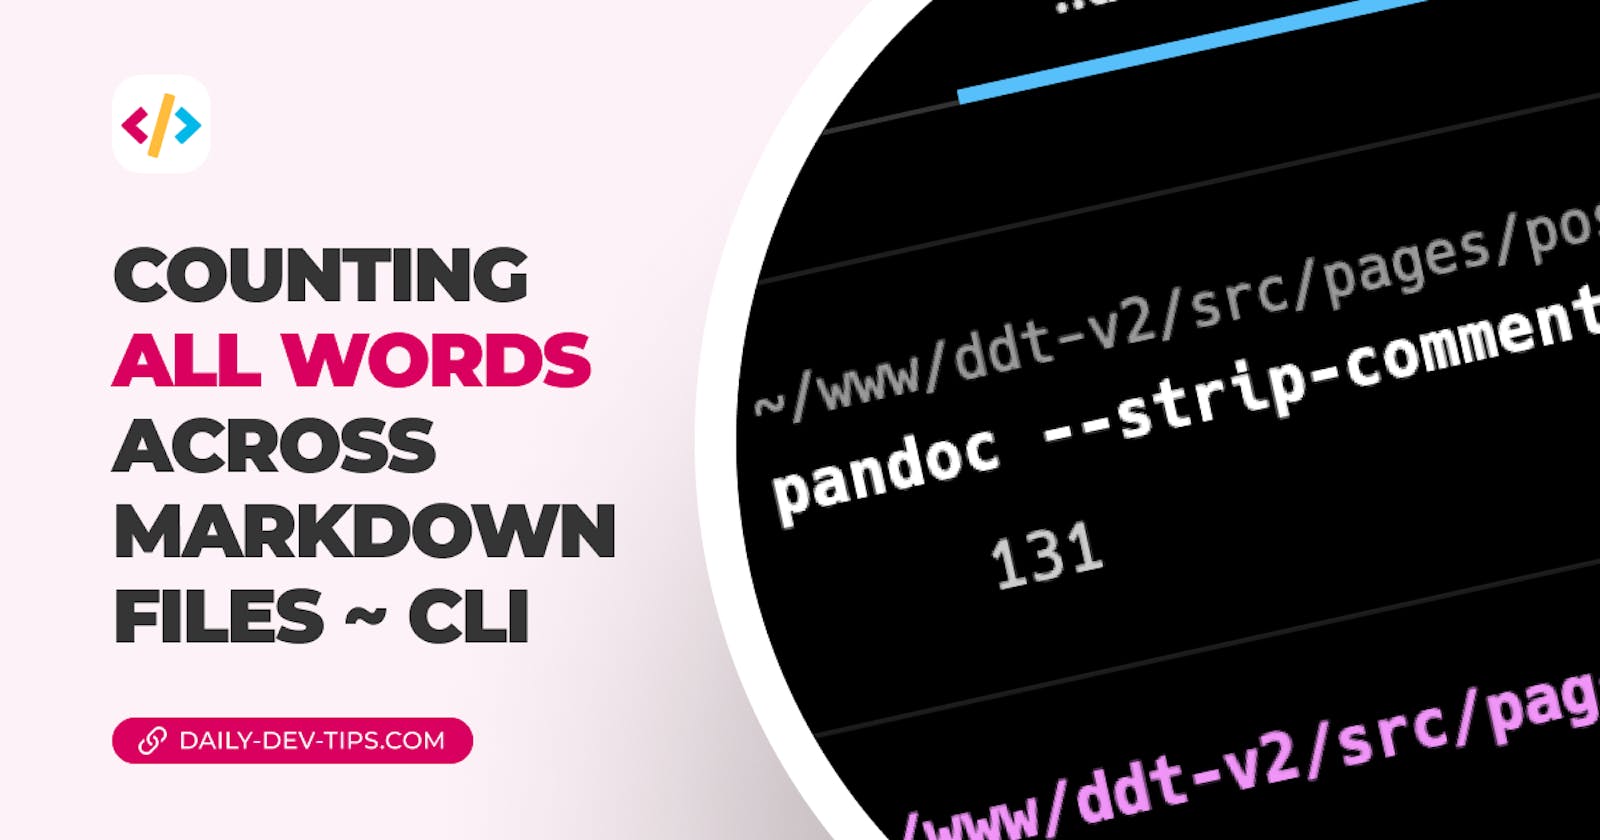 Counting all words across markdown files ~ CLI